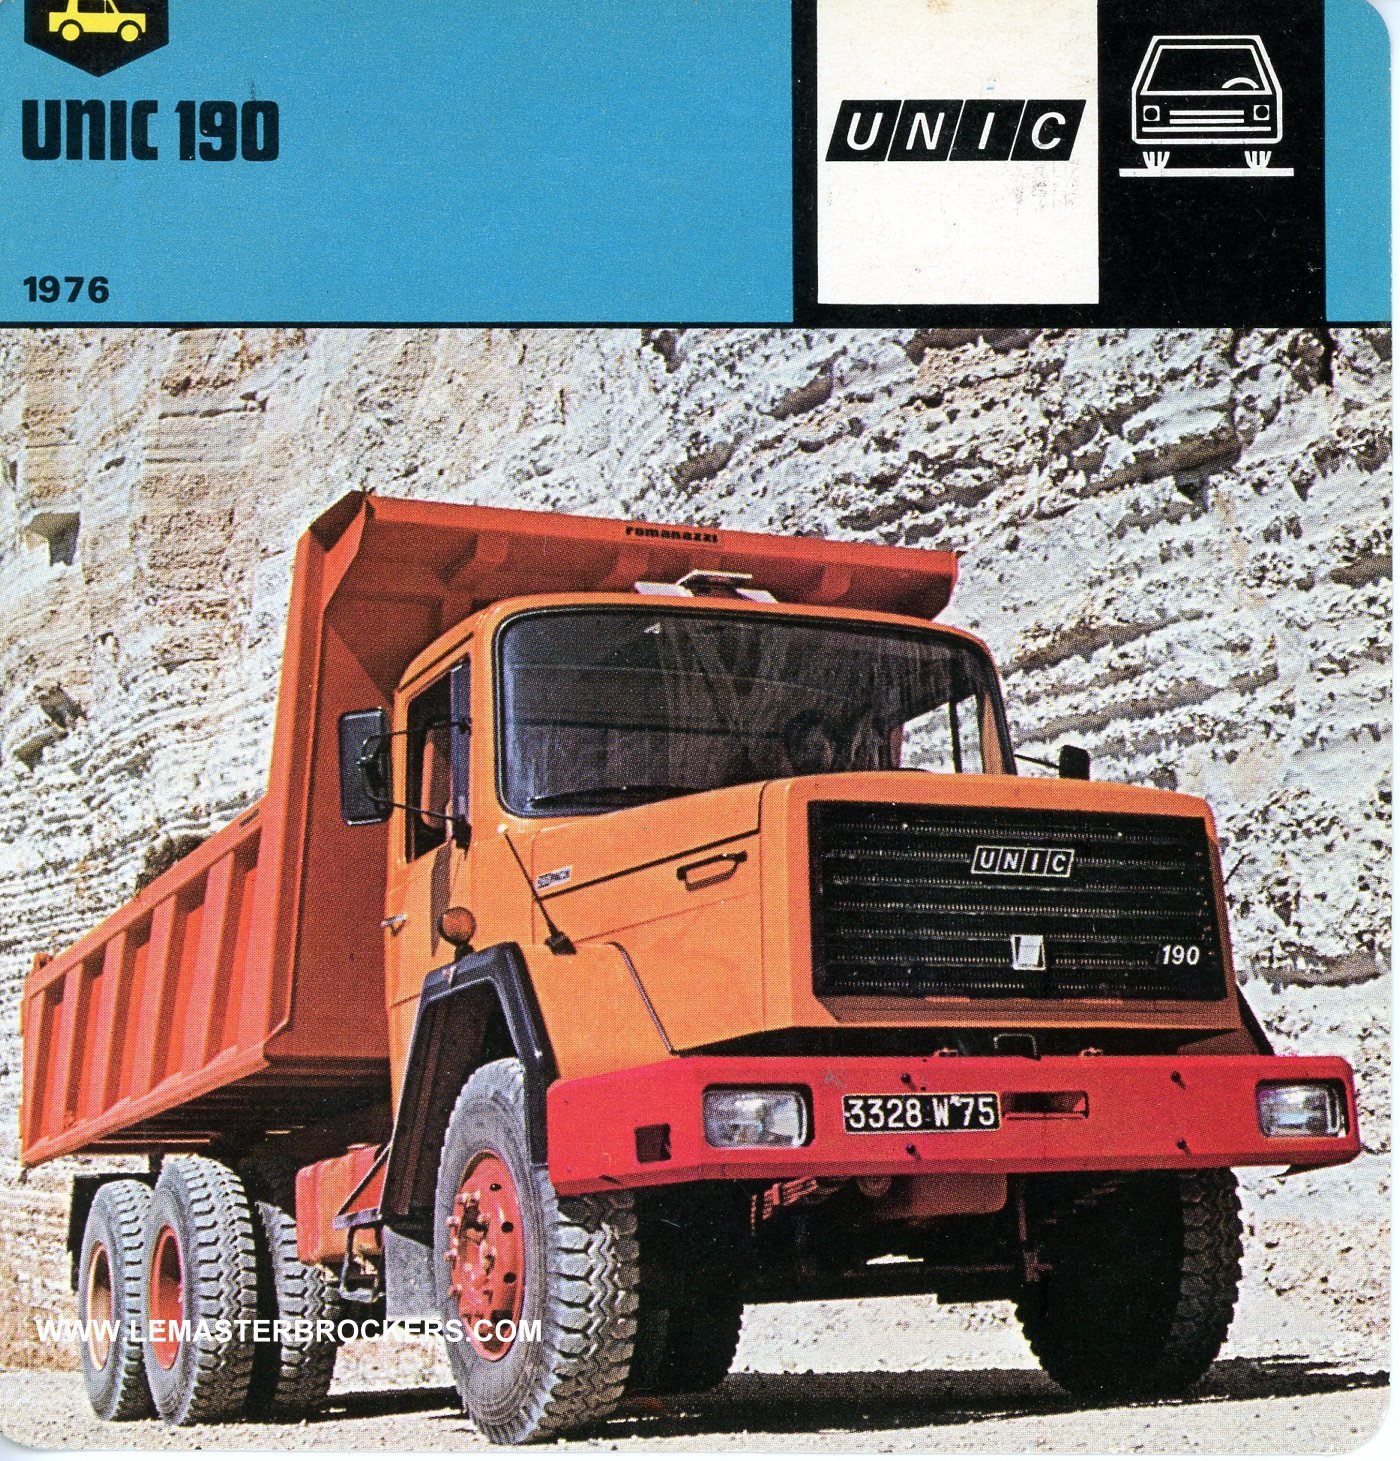 FICHE CAMION UNIC 190 LEMASTERBROCKERS